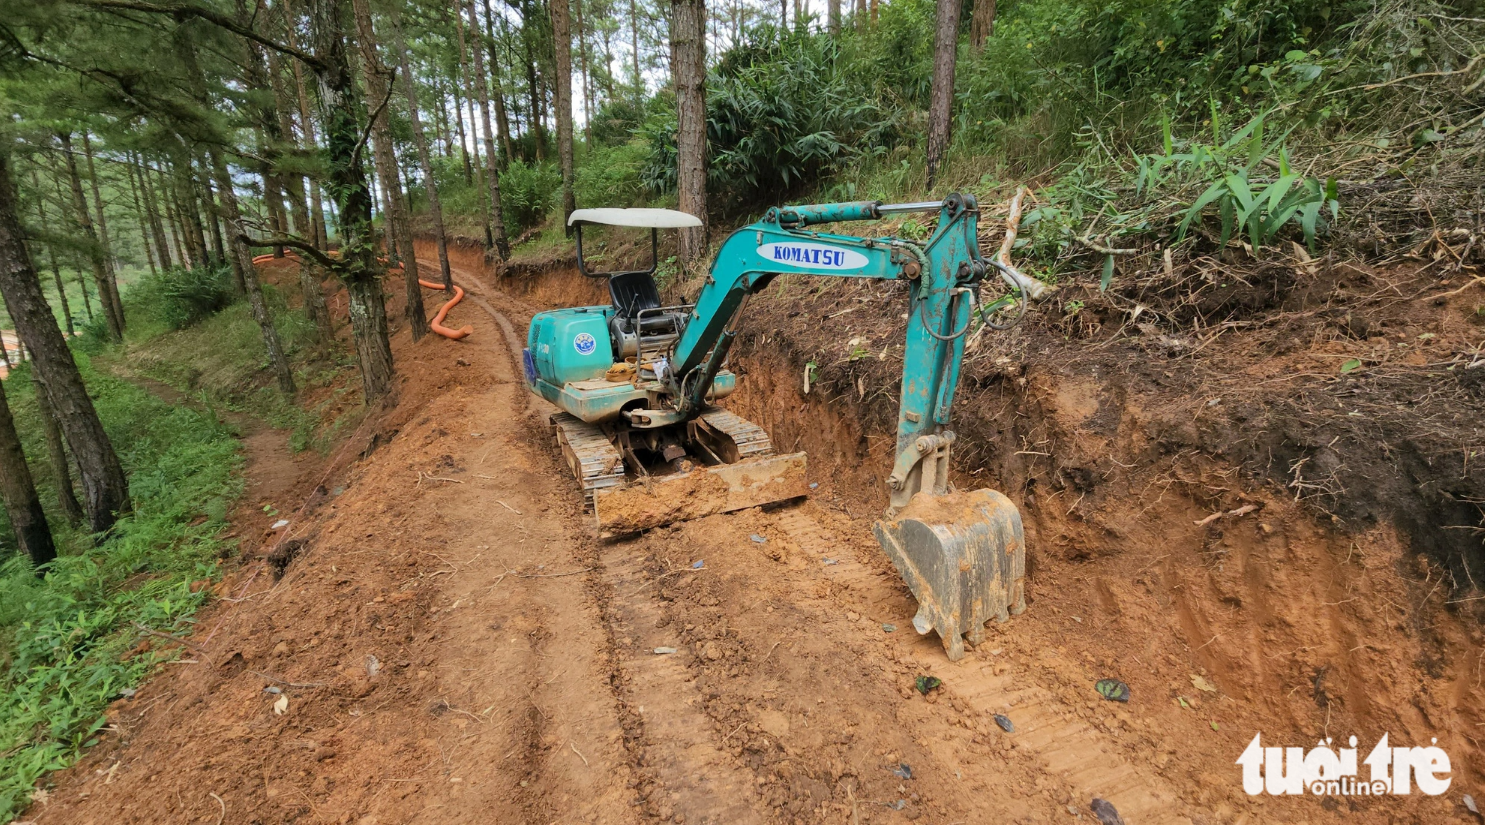 Firm unlawfully opens path through forest at national tourist site in Da Lat